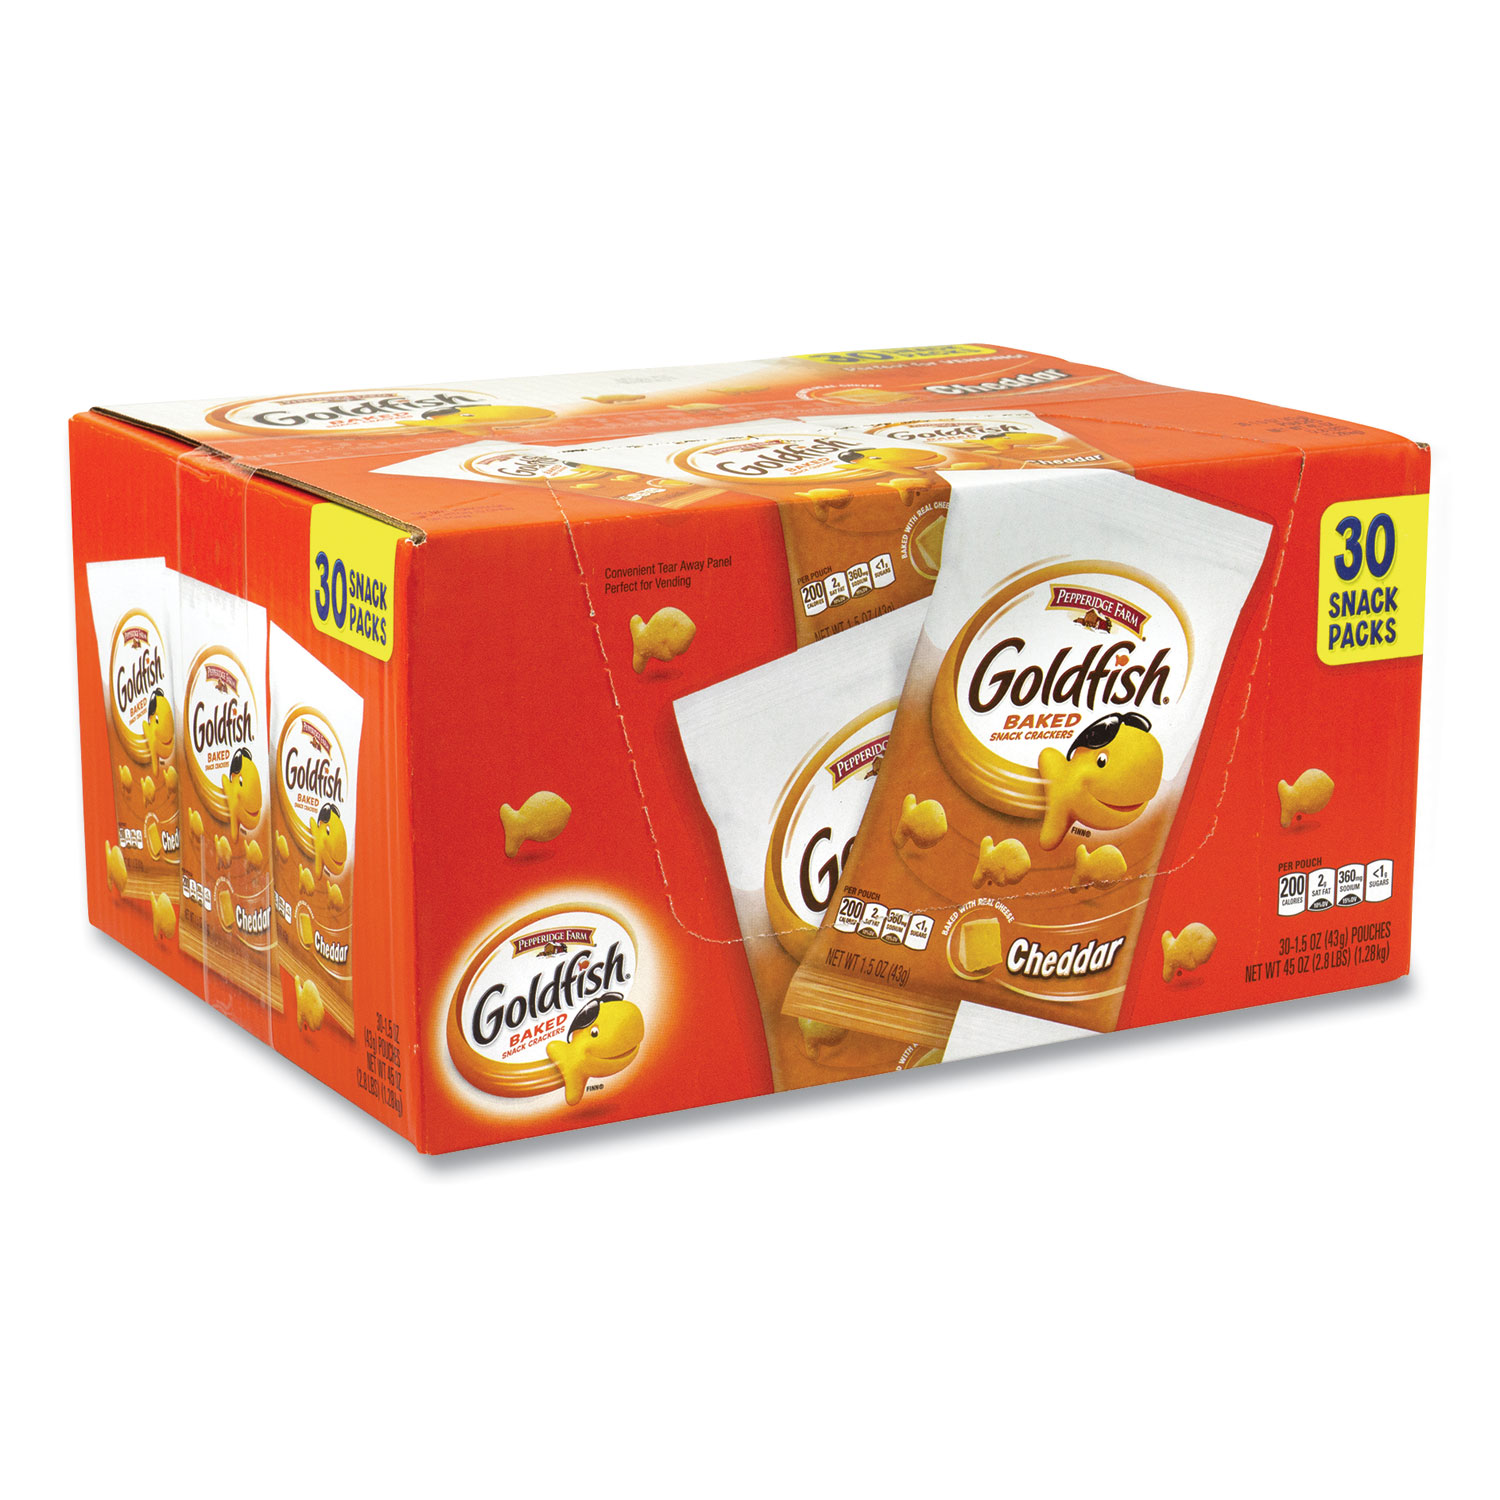 Pepperidge Farm® Goldfish Crackers, Cheddar, 1.5 oz Bag, 30 Bags/Box, Free Delivery in 1-4 Business Days